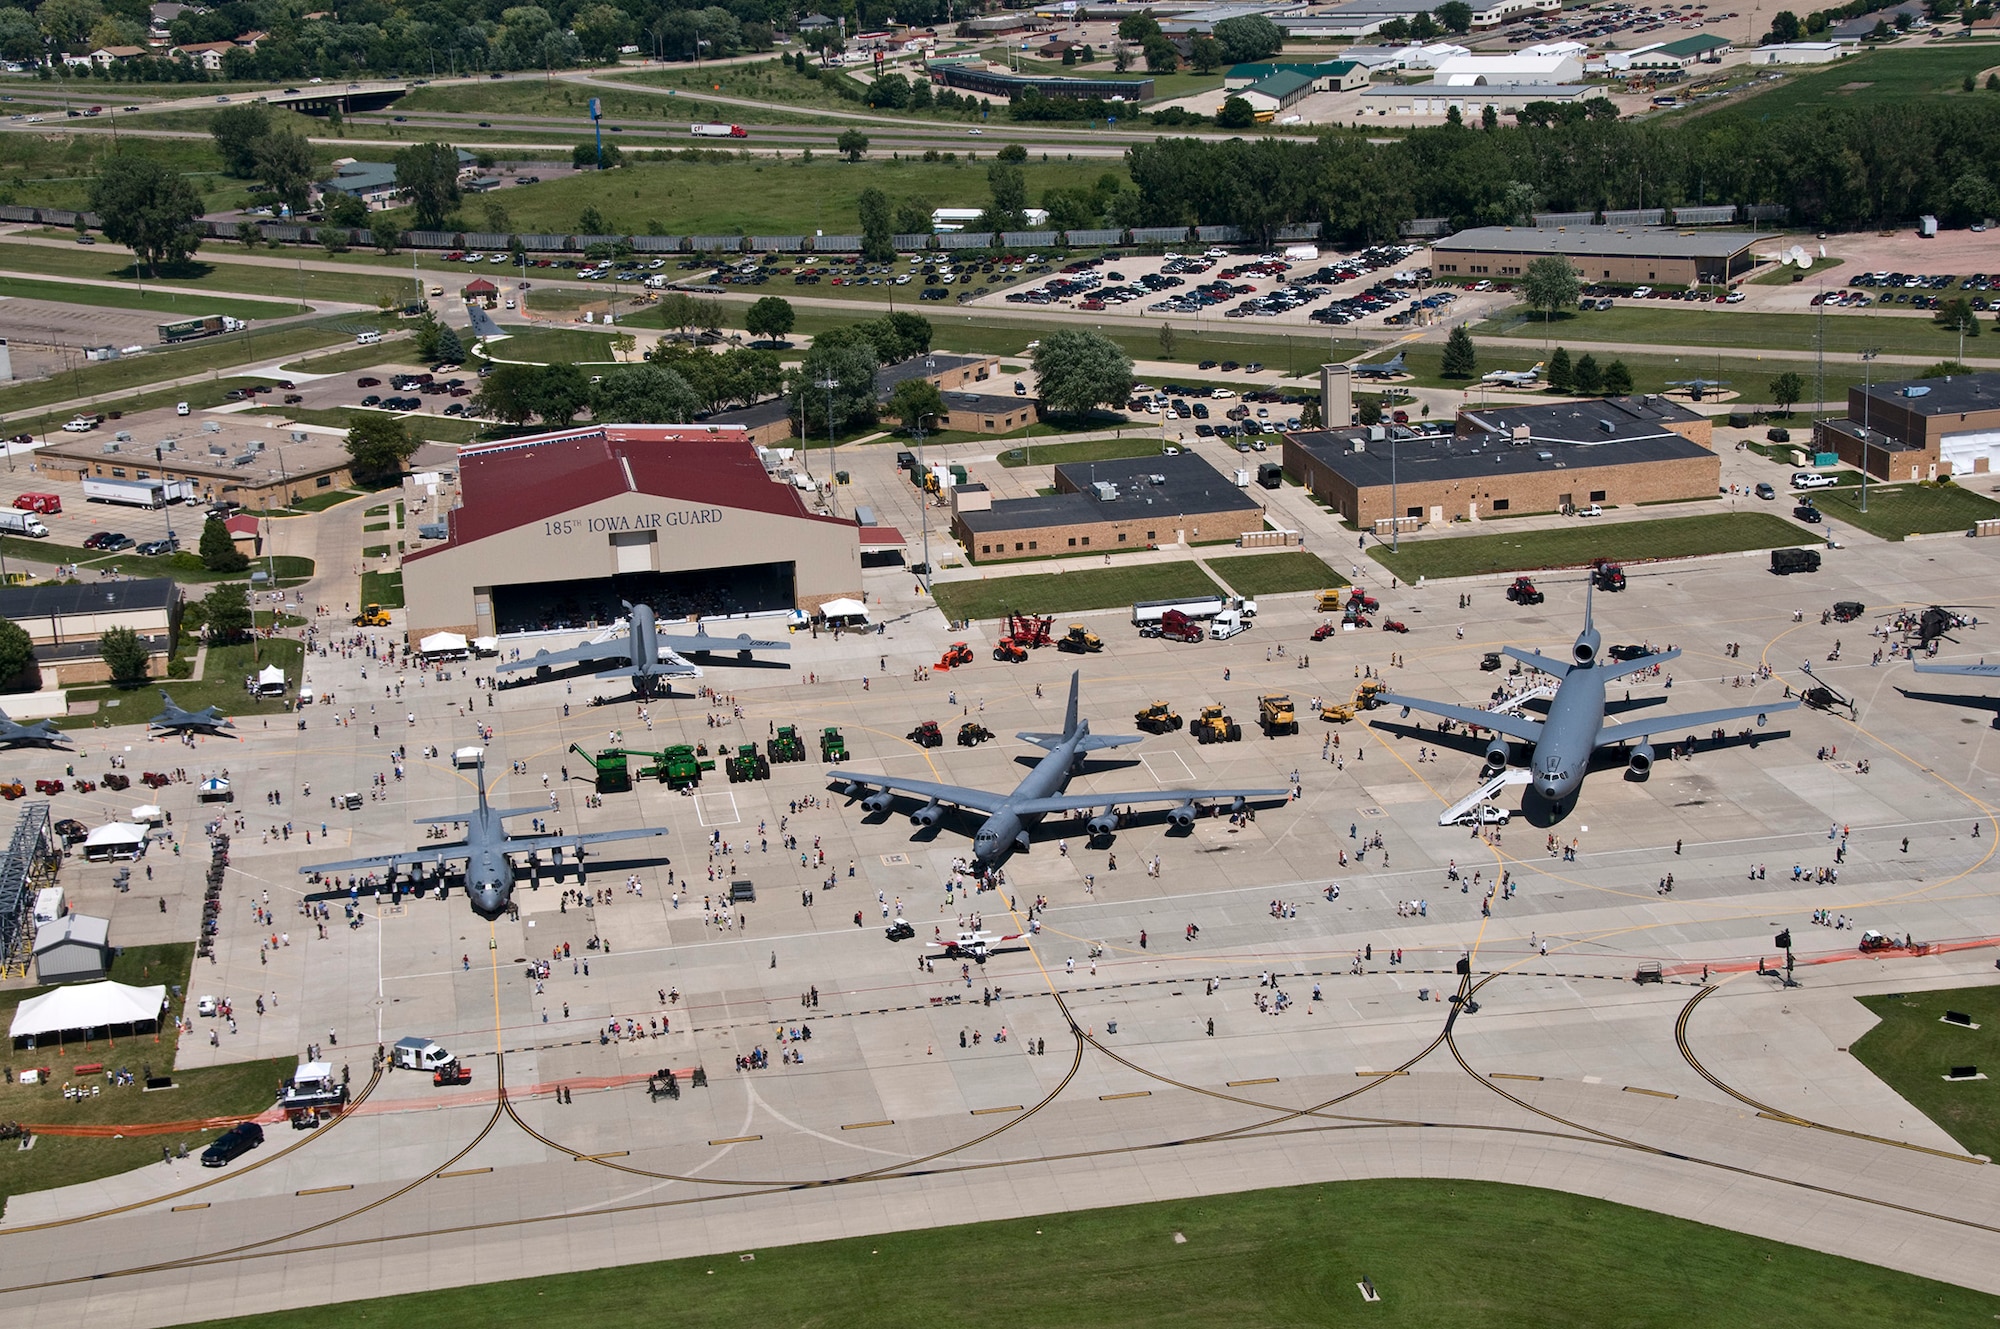 U.S. Air Force aircraft on display during an open house event at the Iowa Air National Guard’s 185th Air Refueling Wing in Sioux City, Iowa on September 2, 2009. 
U.S. Air National Guard photo by Technical Sgt. Oscar Sanchez/released